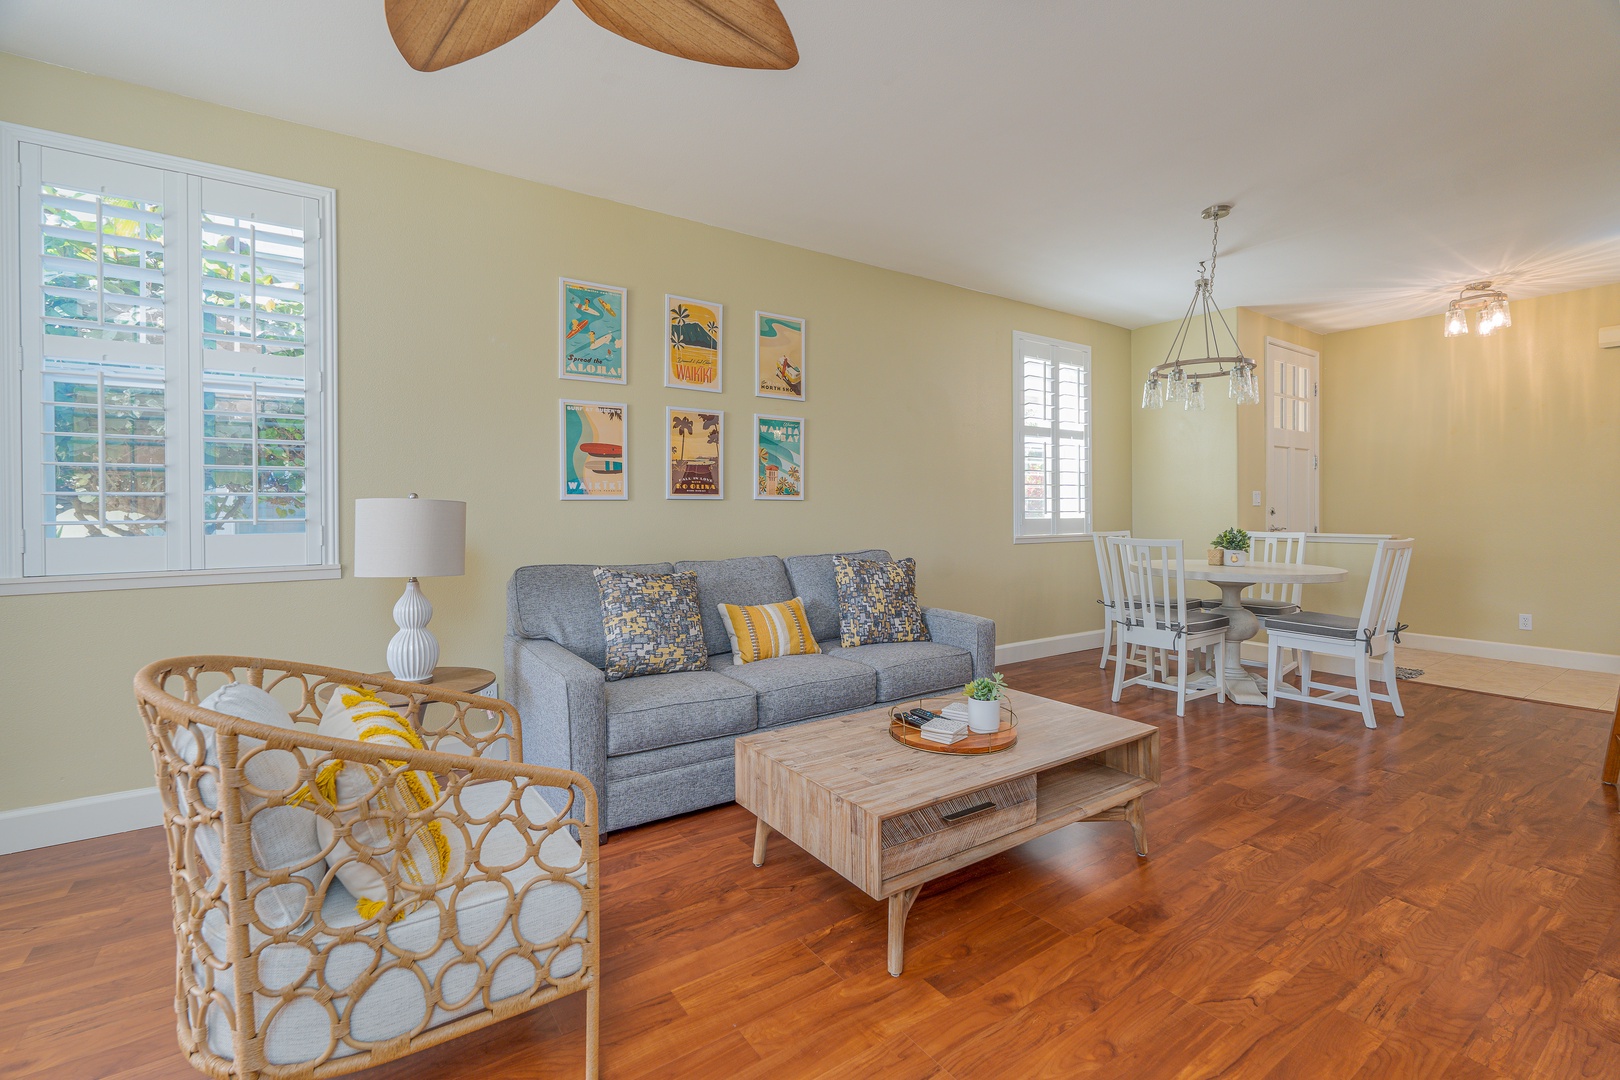 Kapolei Vacation Rentals, Ko Olina Kai 1105F - Cozy and bright living room with hardwood floors leading to a welcoming dining area.